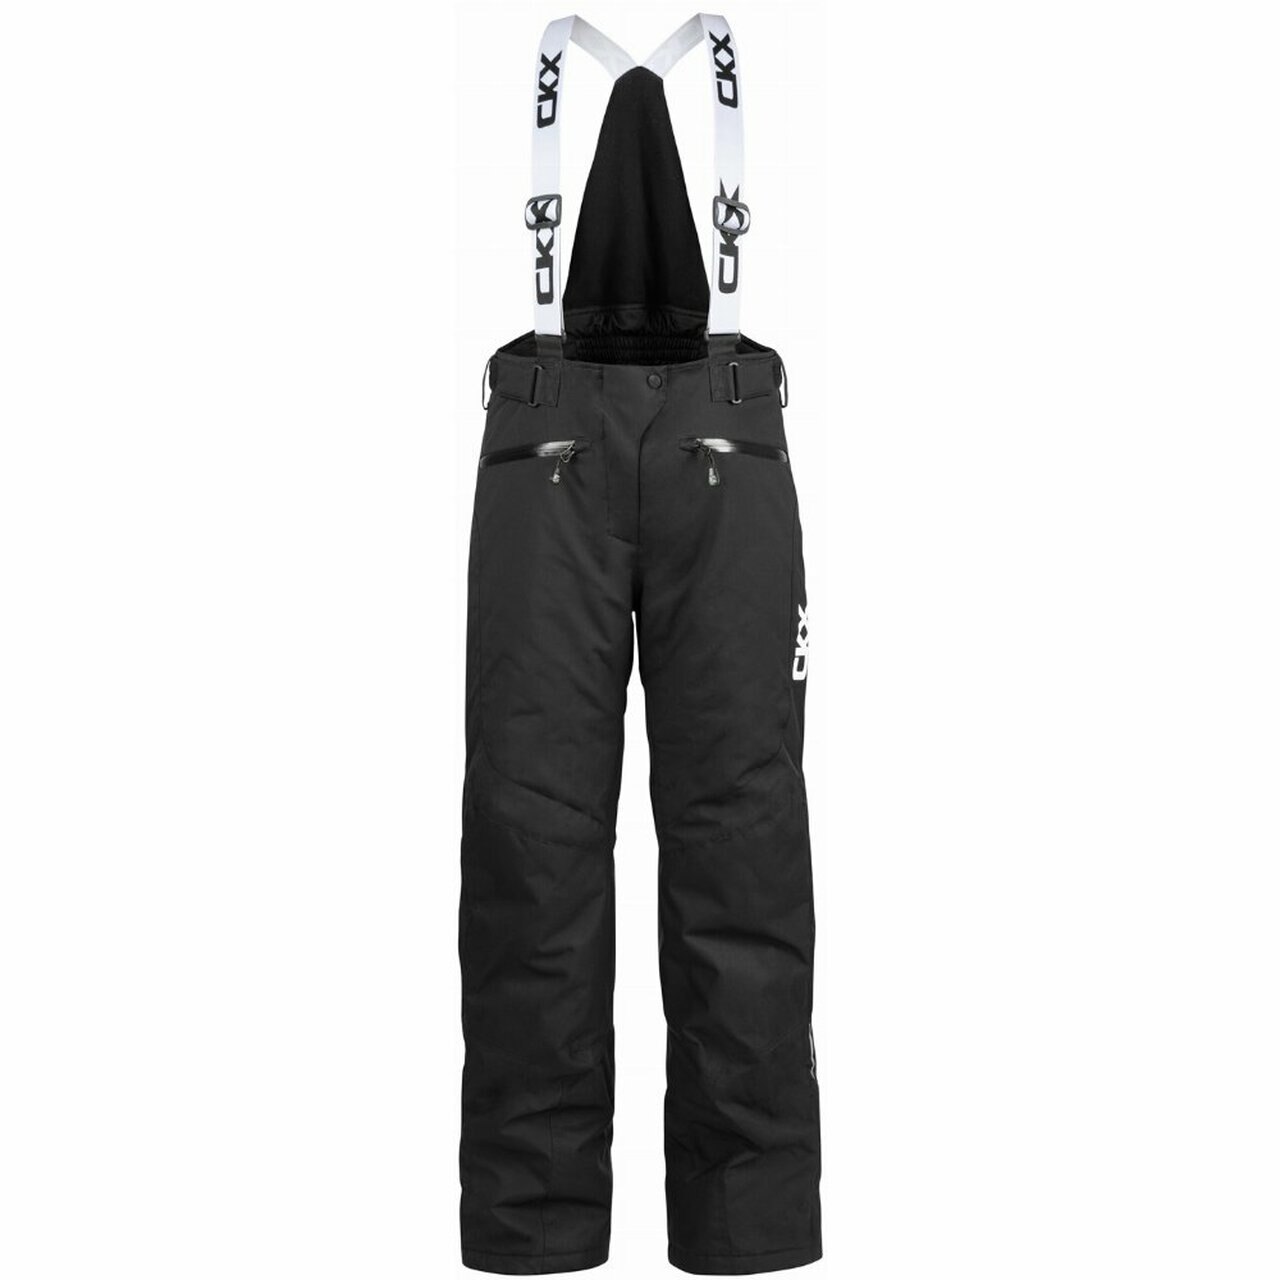 CKX WOMENS JOURNEY INSULATED PANTS M